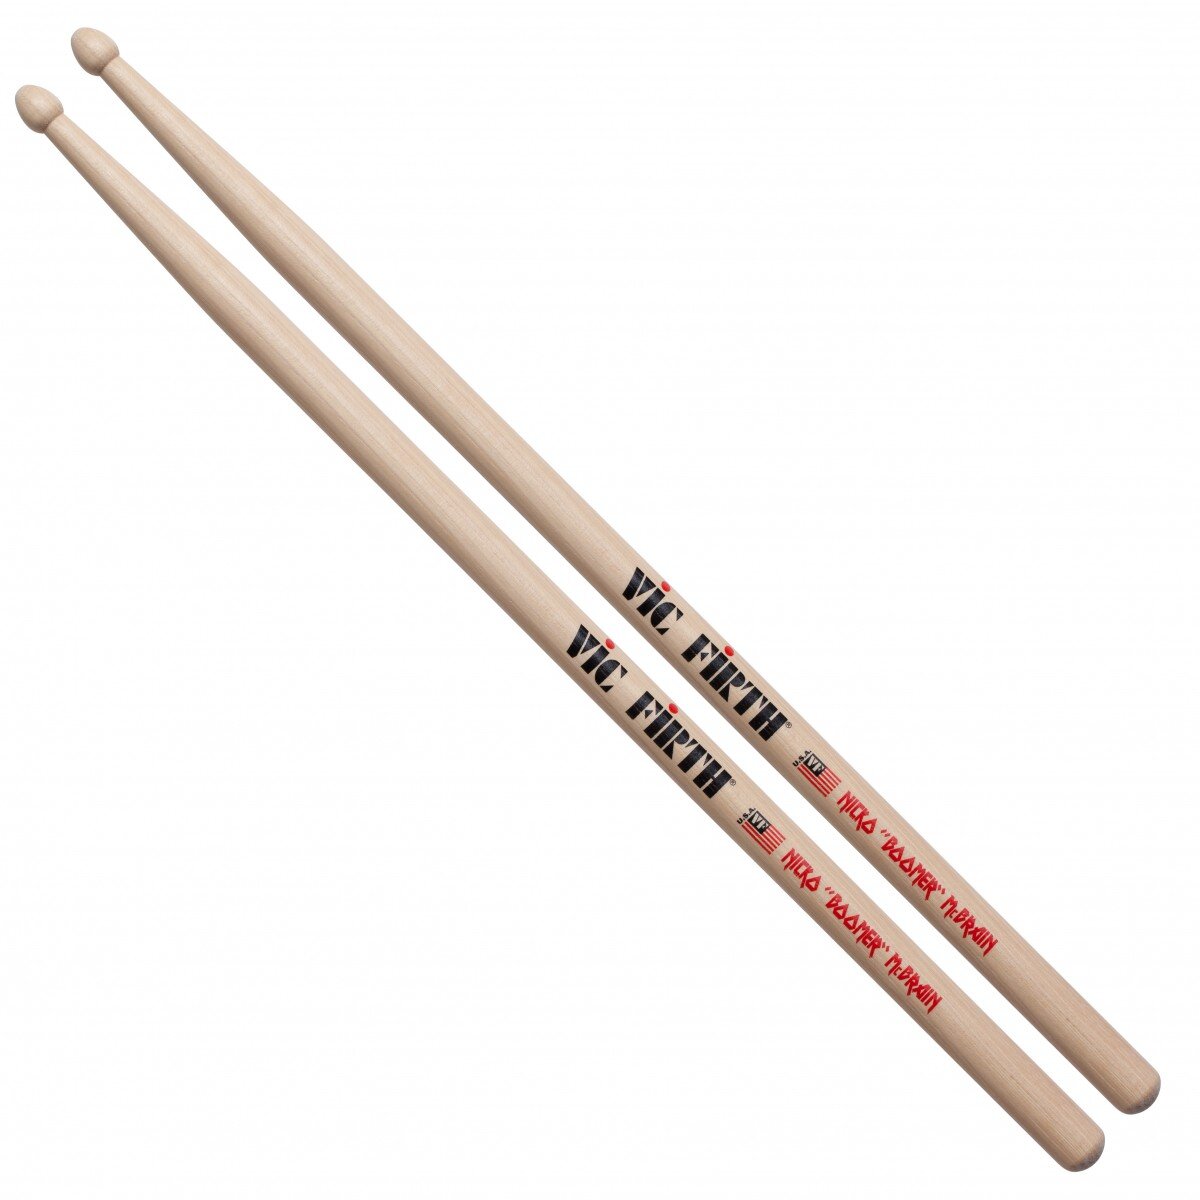 Vic Firth Signature Nicko McBrain SNM L = 406 mm D = 151 mm Holzspitze : photo 1